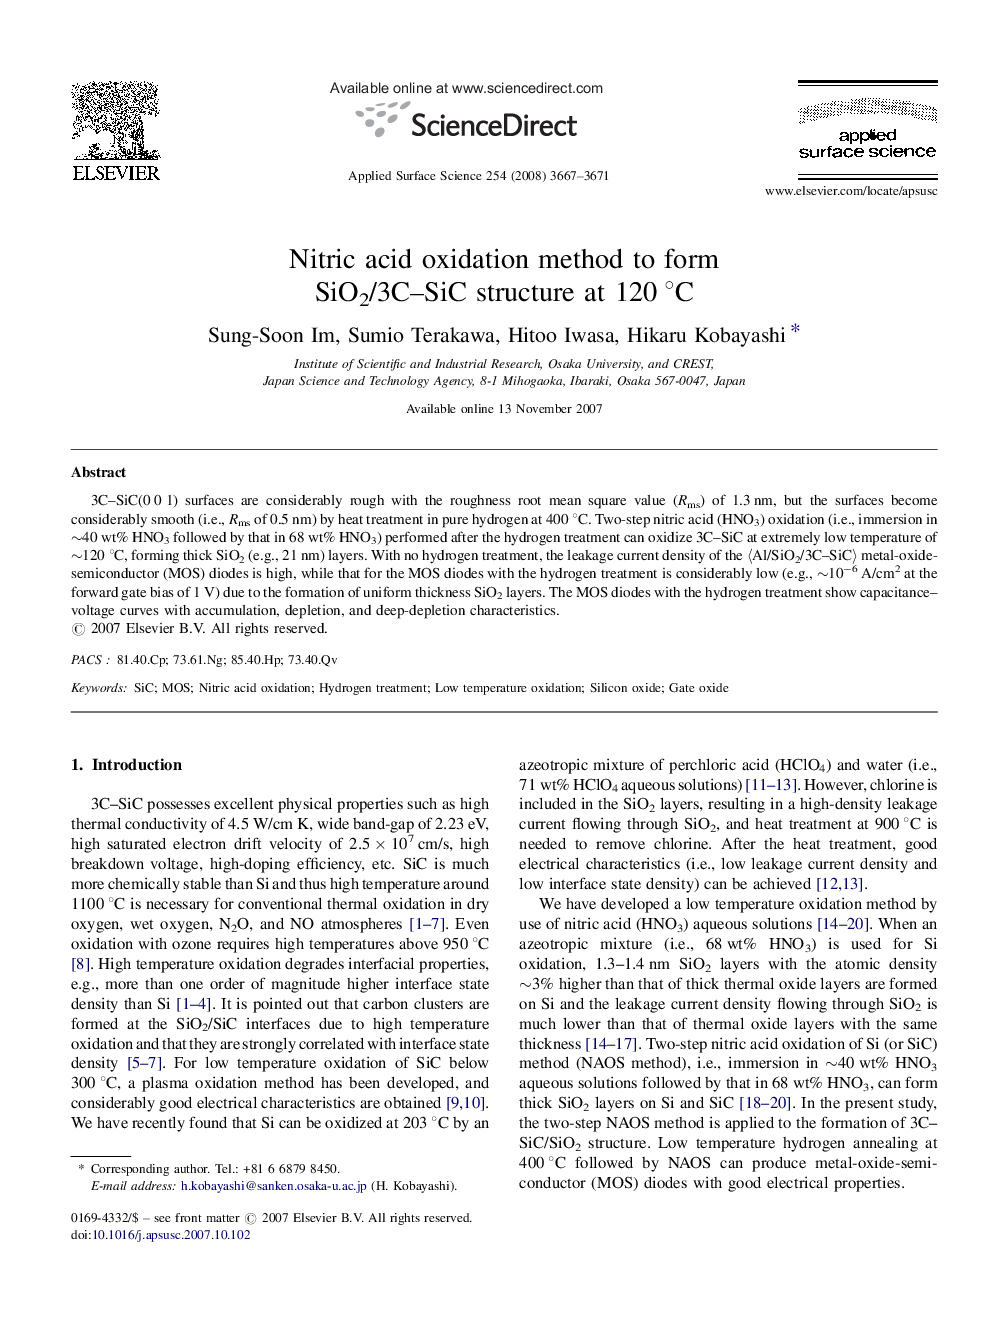 Nitric acid oxidation method to form SiO2/3C-SiC structure at 120Â Â°C